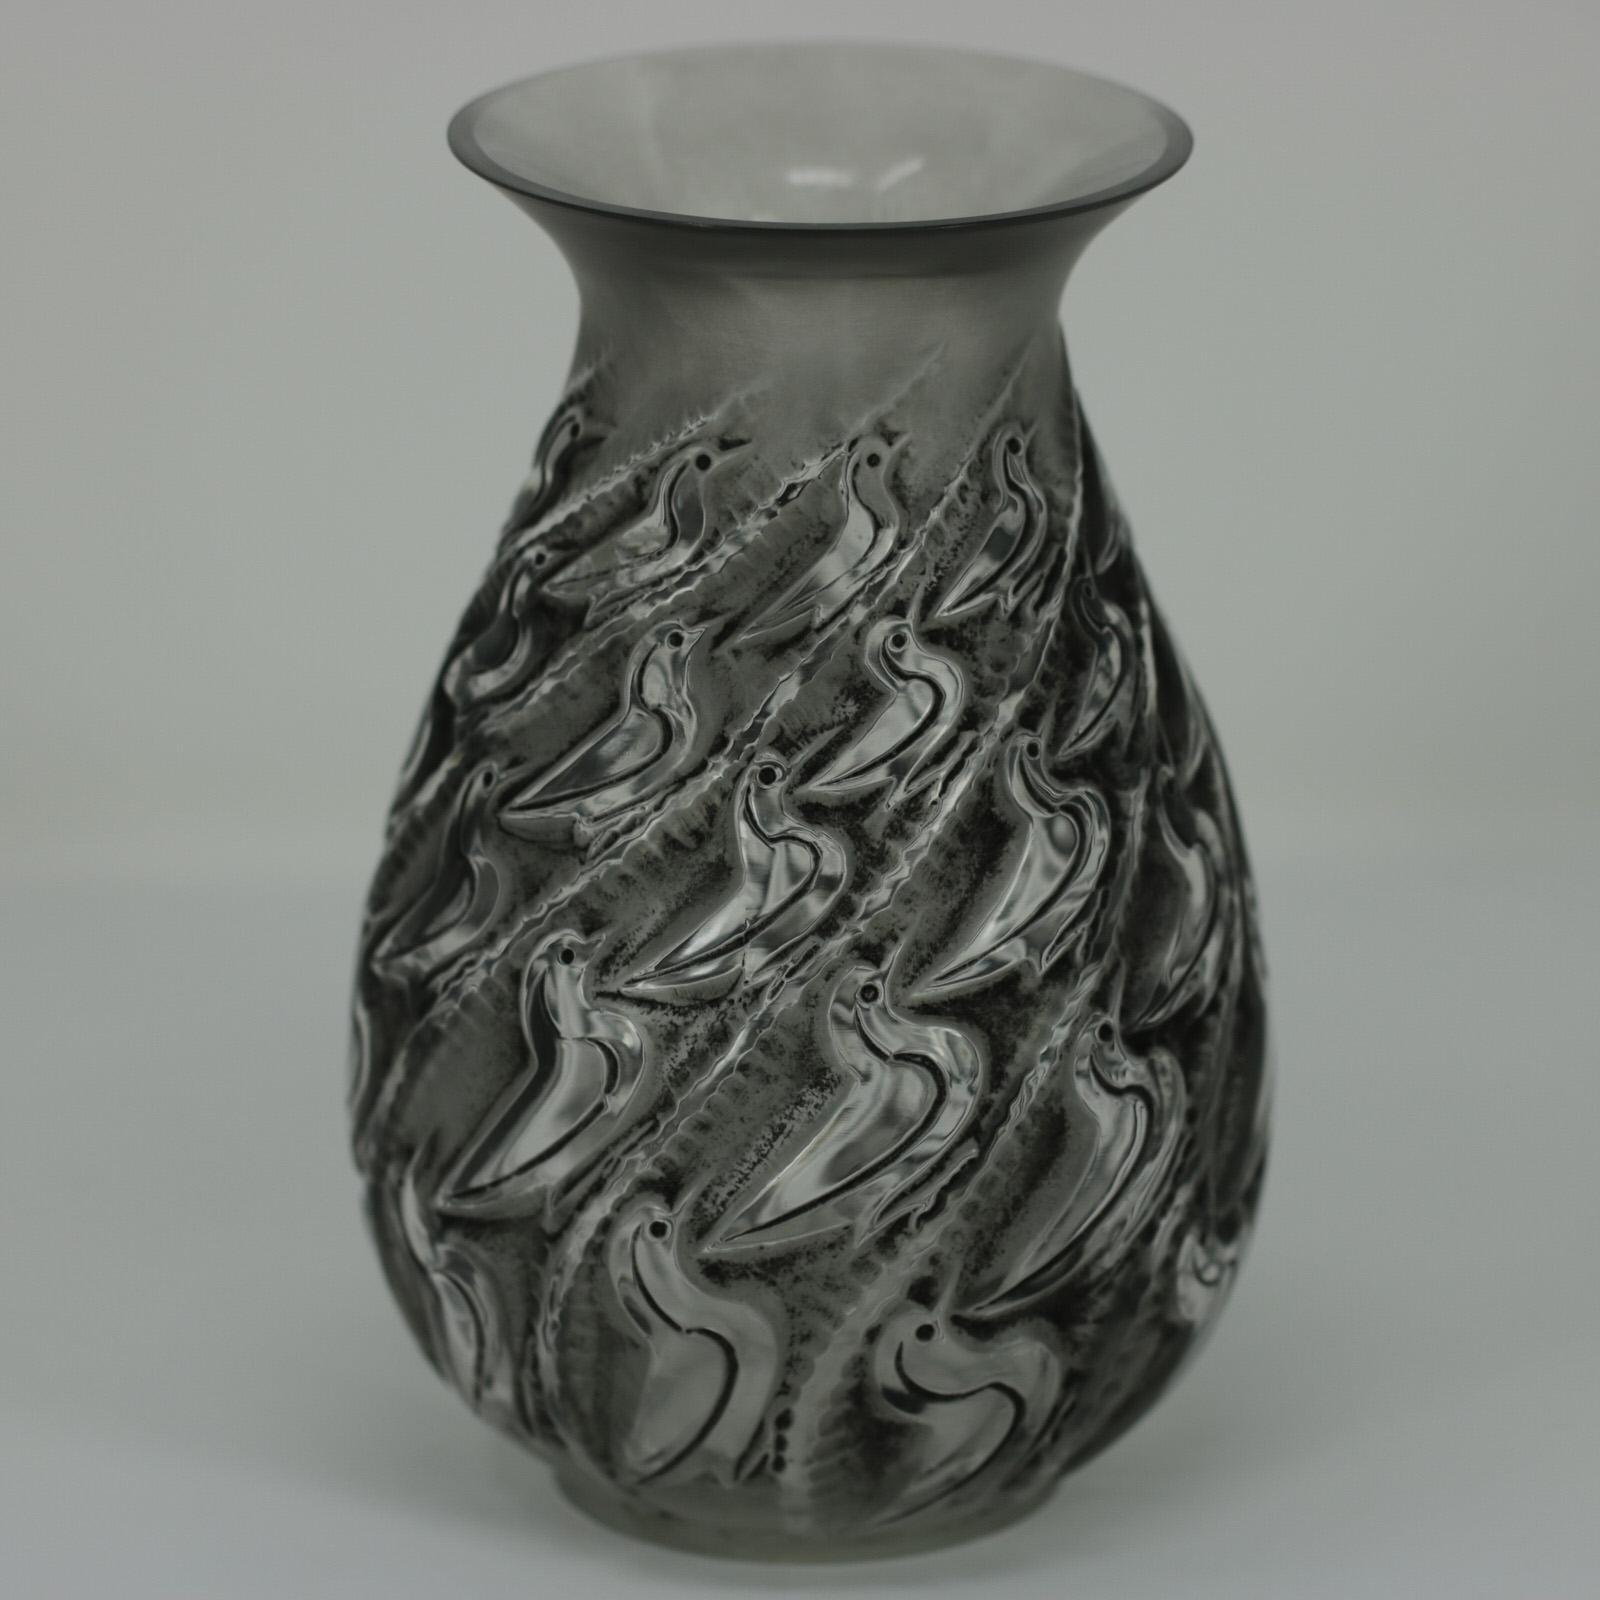 René Lalique clear and frosted glass 'Canards' vase. Grey and black patina applied to the details. This pattern features ducks, sprialling up the sides. The design was created from an initial drawing by Suzanne Lalique (daughter of Rene). Stencilled